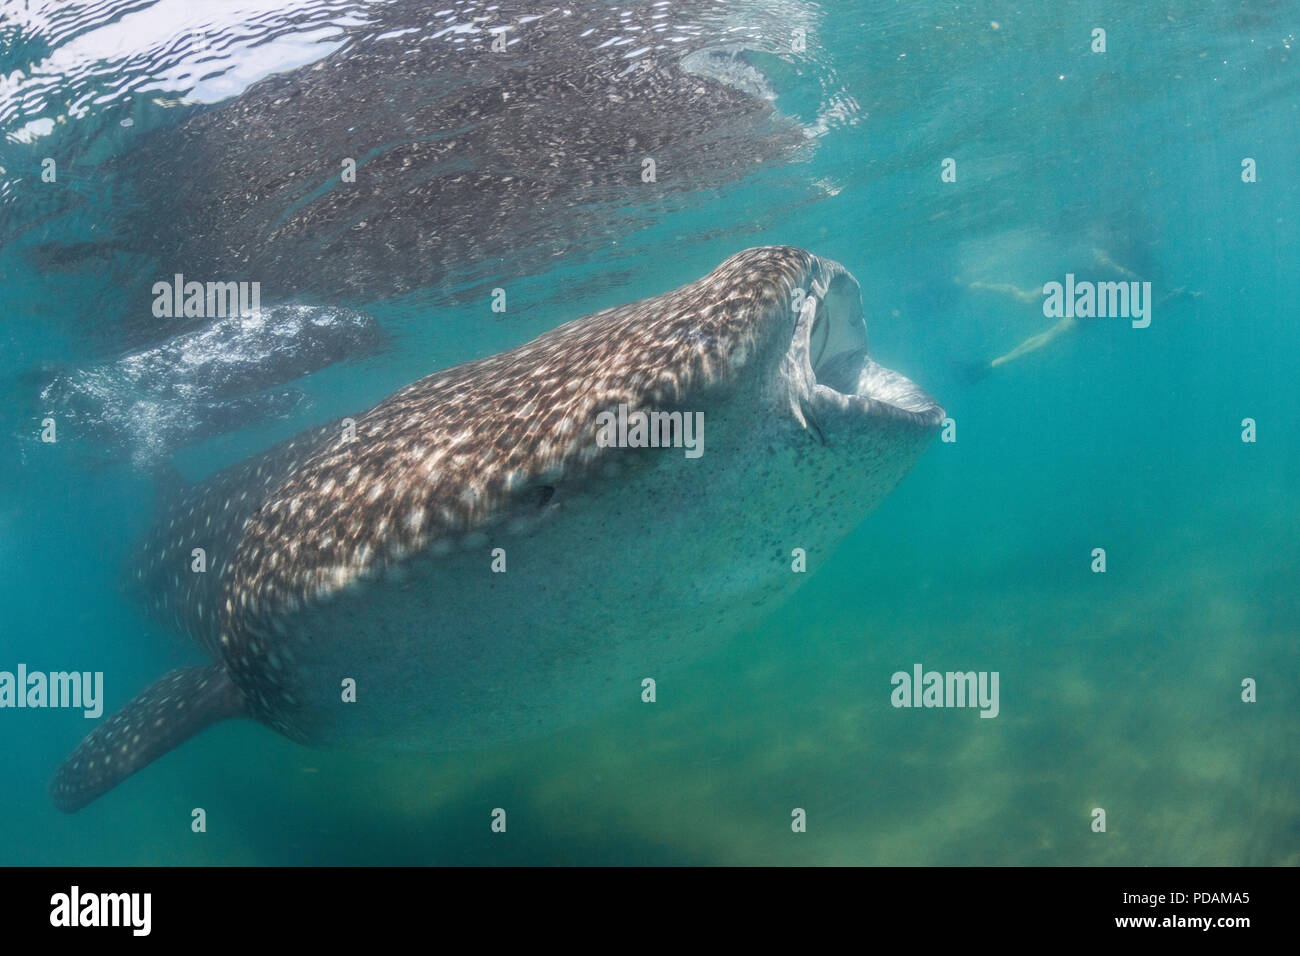 Young whale shark, Rhincodon typus, underwater with snorkeler at El Mogote, Baja California Sur, Mexico. Stock Photo